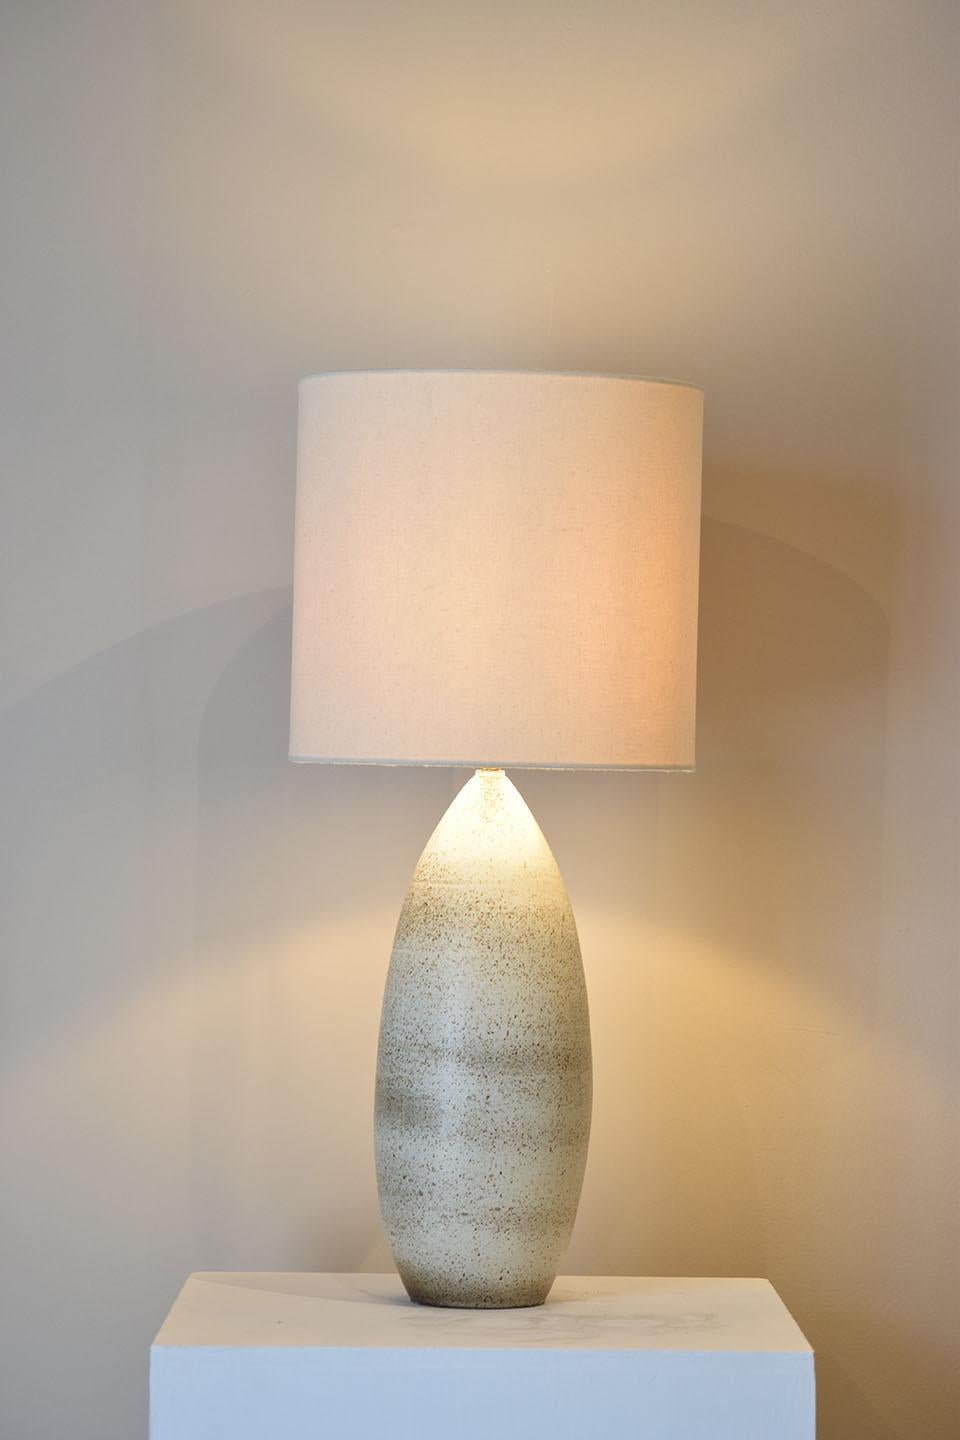 ADN Studio ceramic table lamp
Warm light amazing color. Perfect for any ambience.
Open edition.